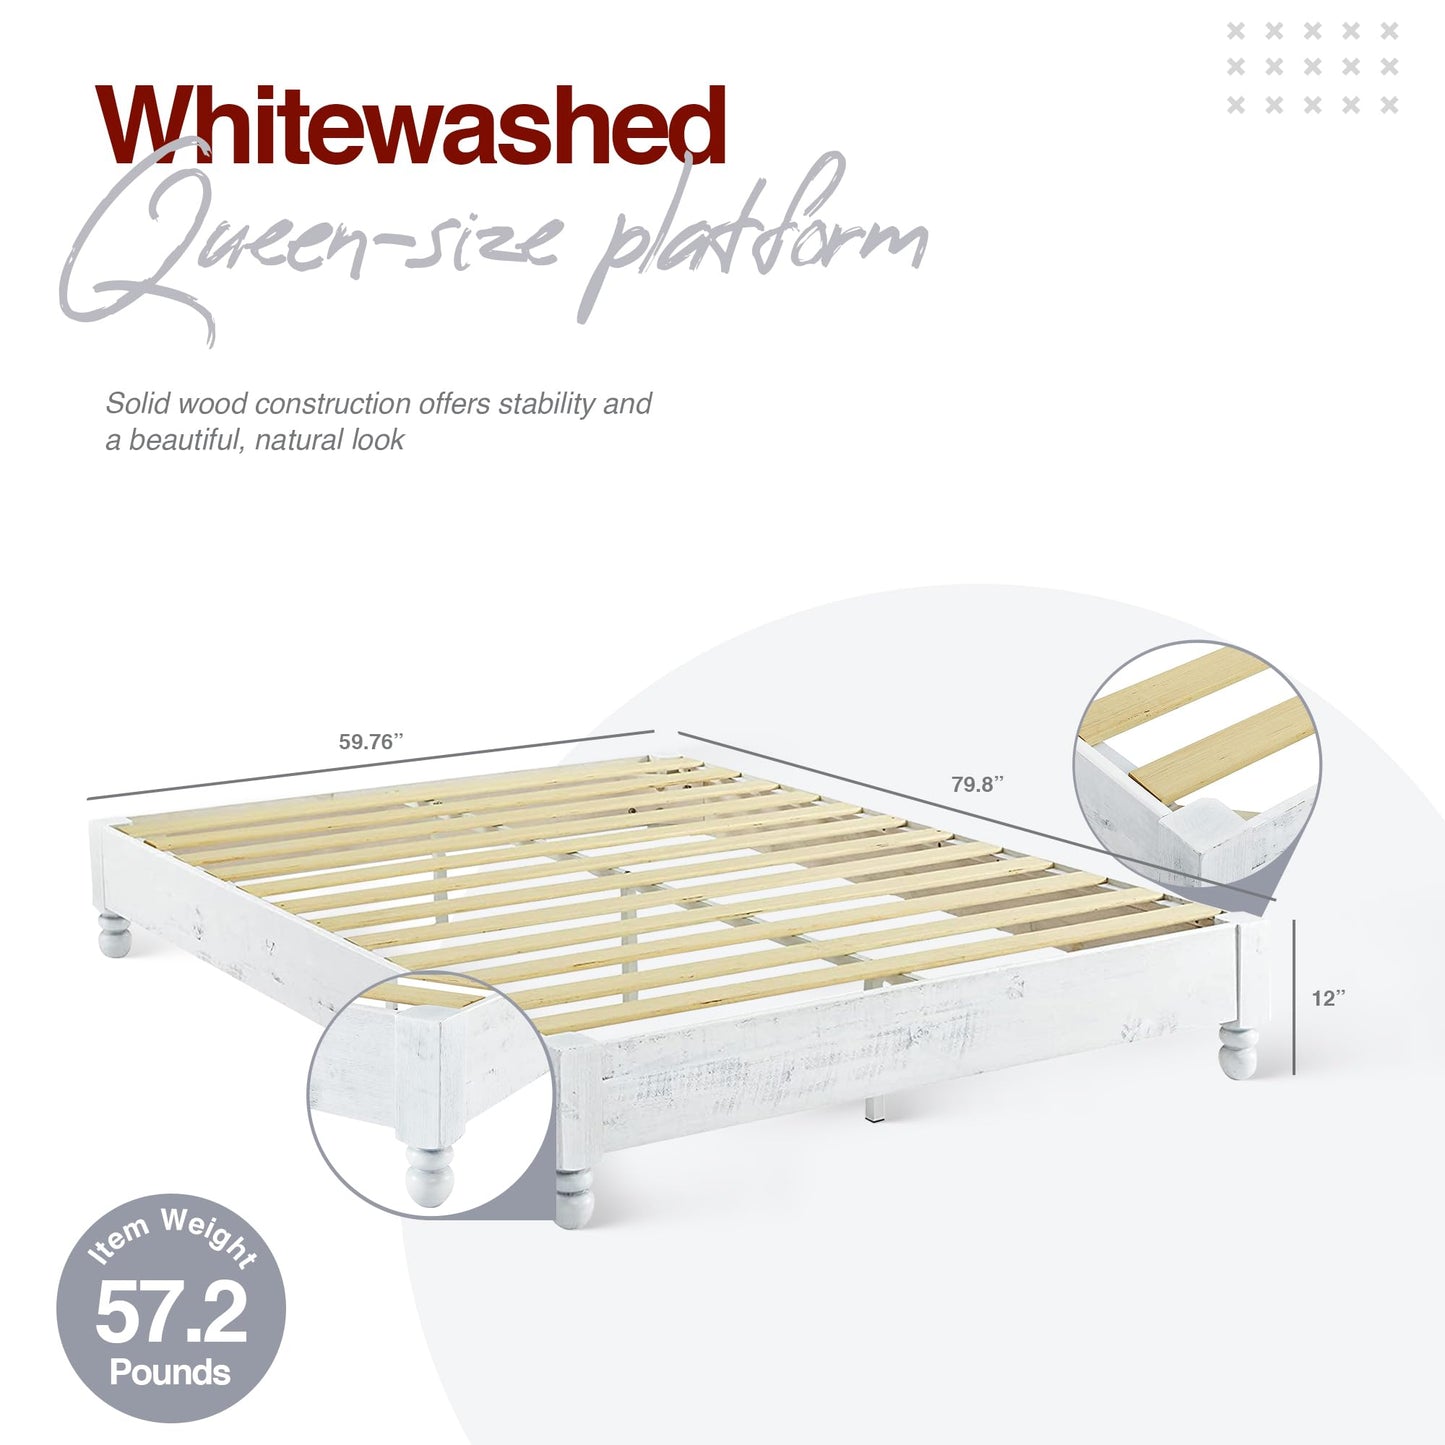 MUSEHOMEINC Solid Wood Platform Bed Frame Rustic Style,Mattress Foundation(no boxspring Needed), White Washed Finish,Queen